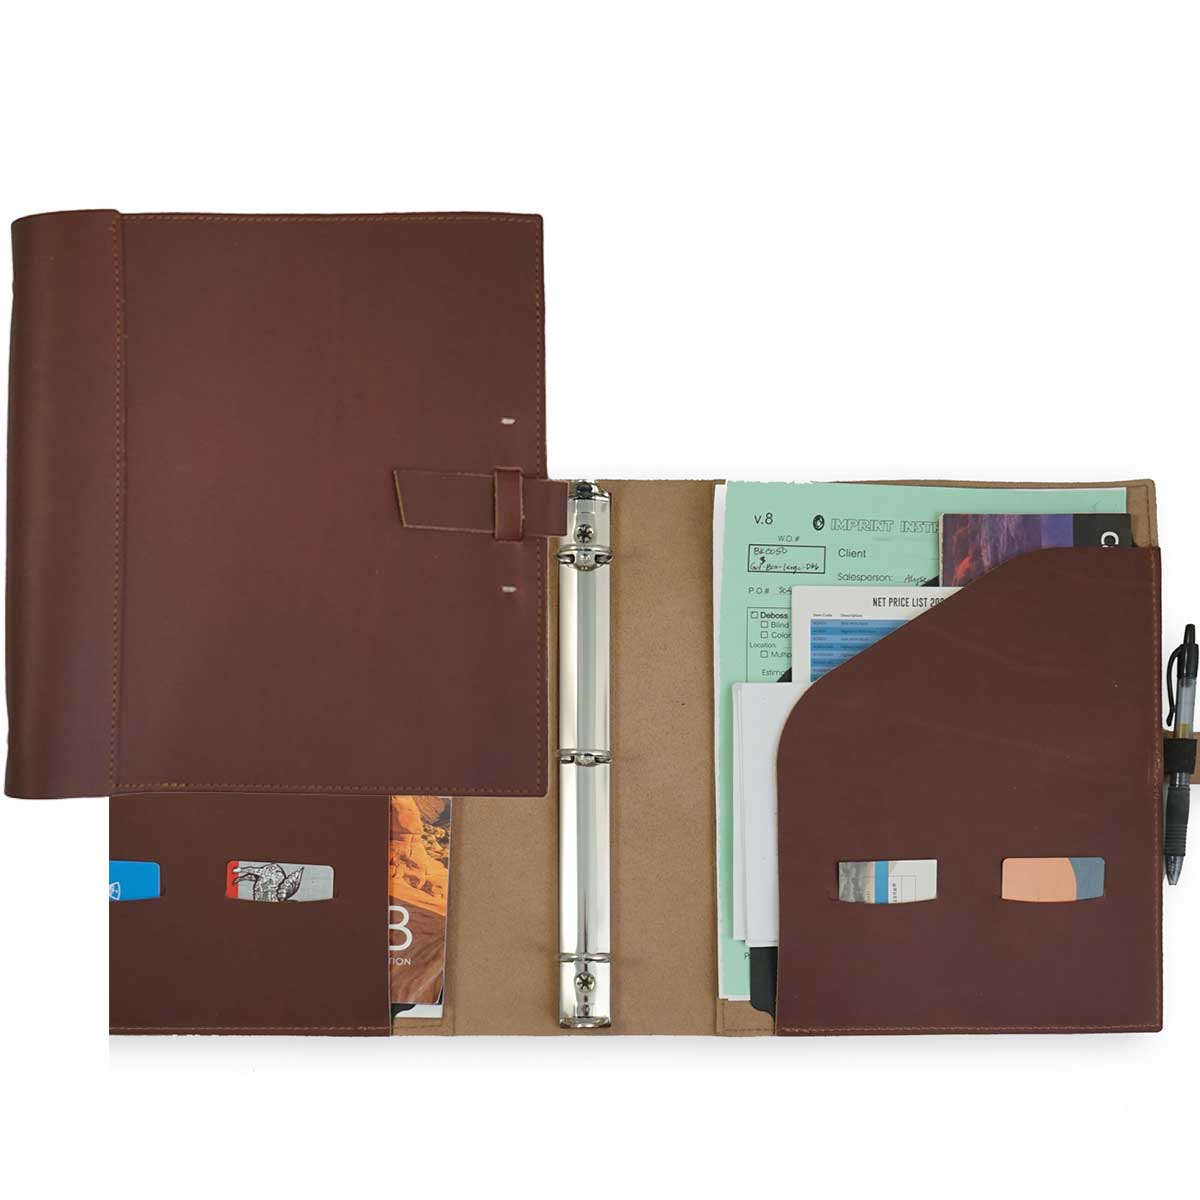 Rustico OF0070-0002-01 Soft Leather Binder Pro 8.5'' x 11'' in Saddle